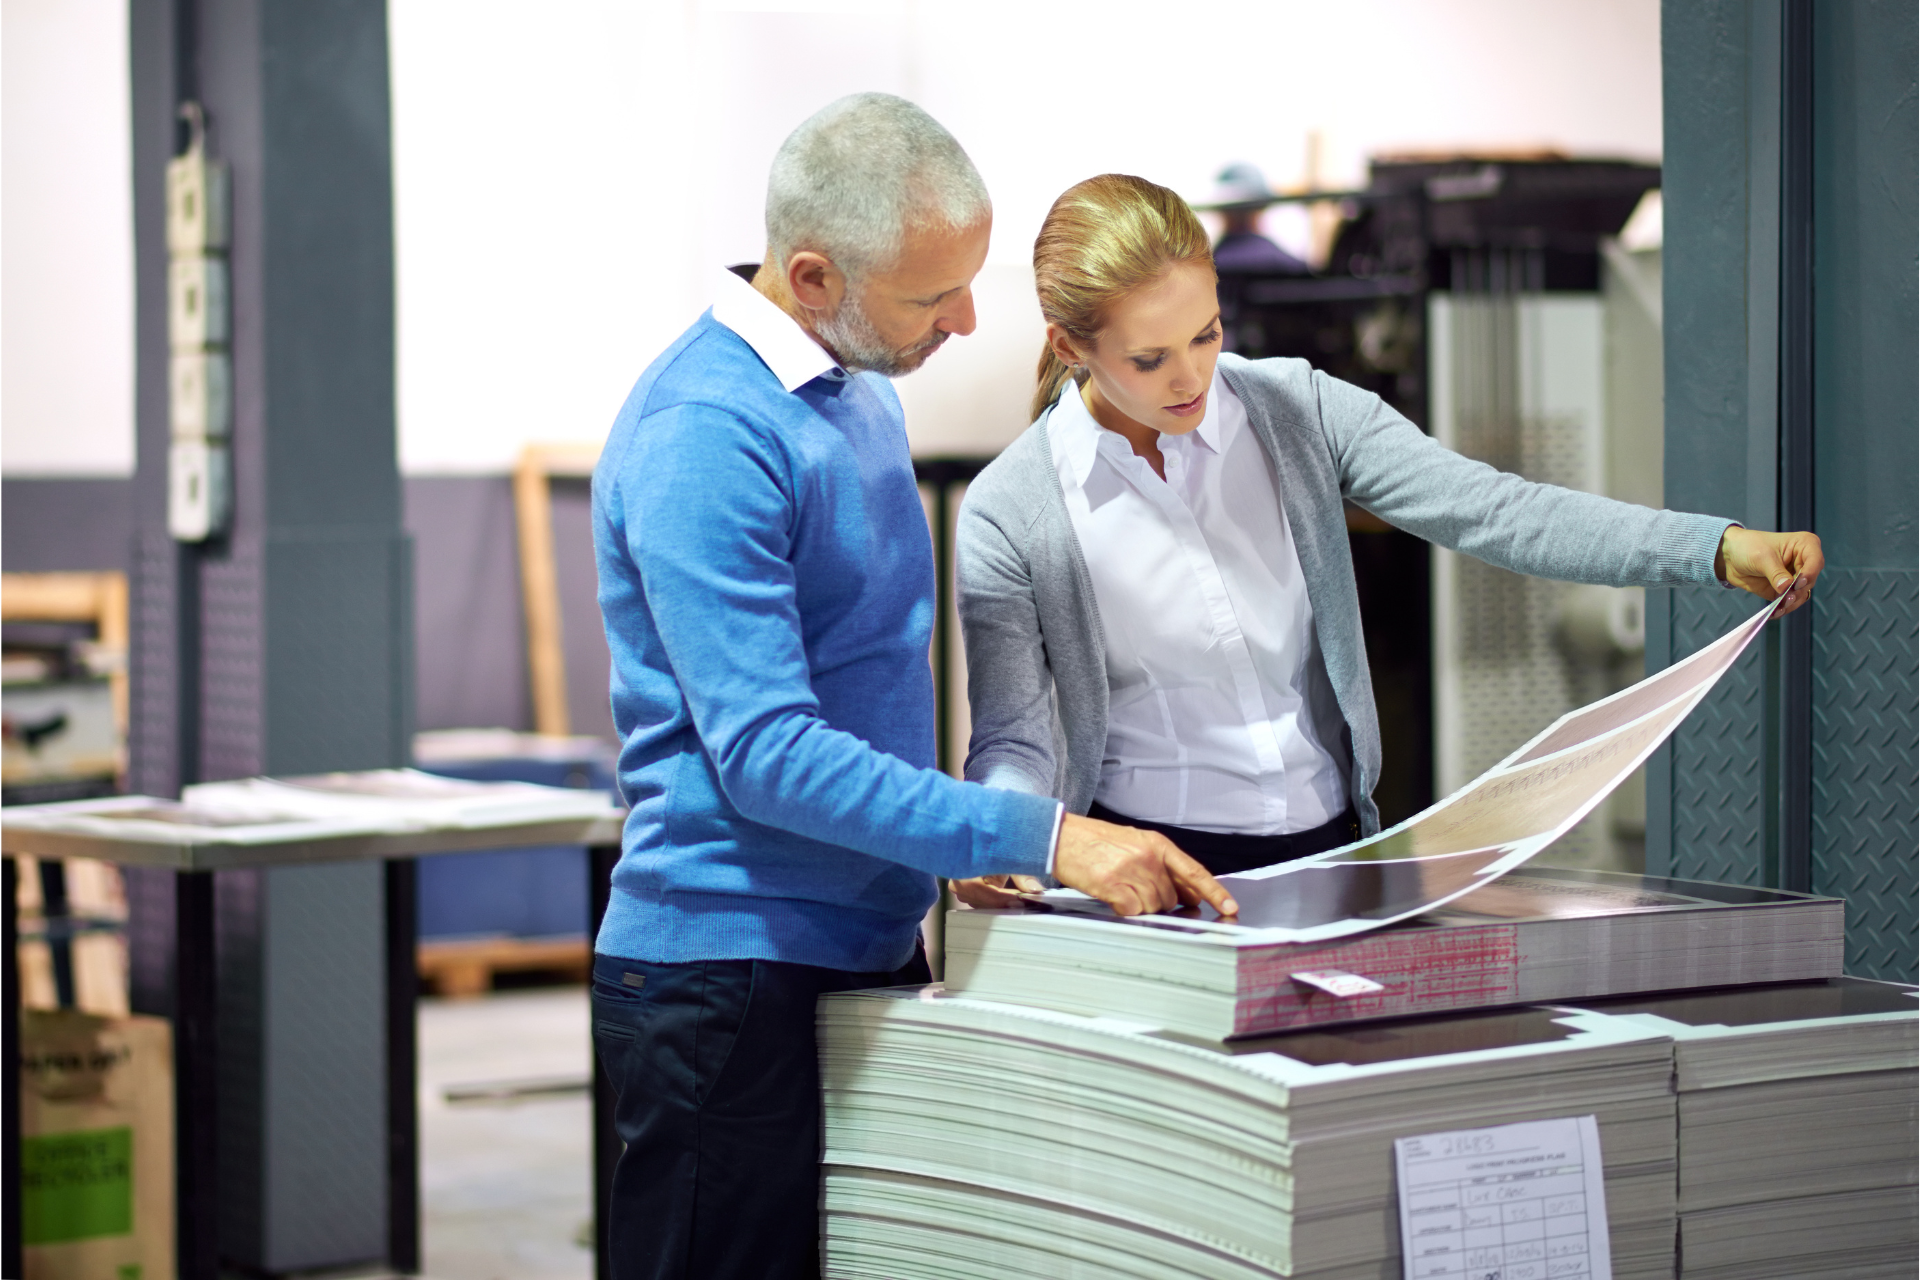 Two editors review printed packaging materials in a publishing warehouse